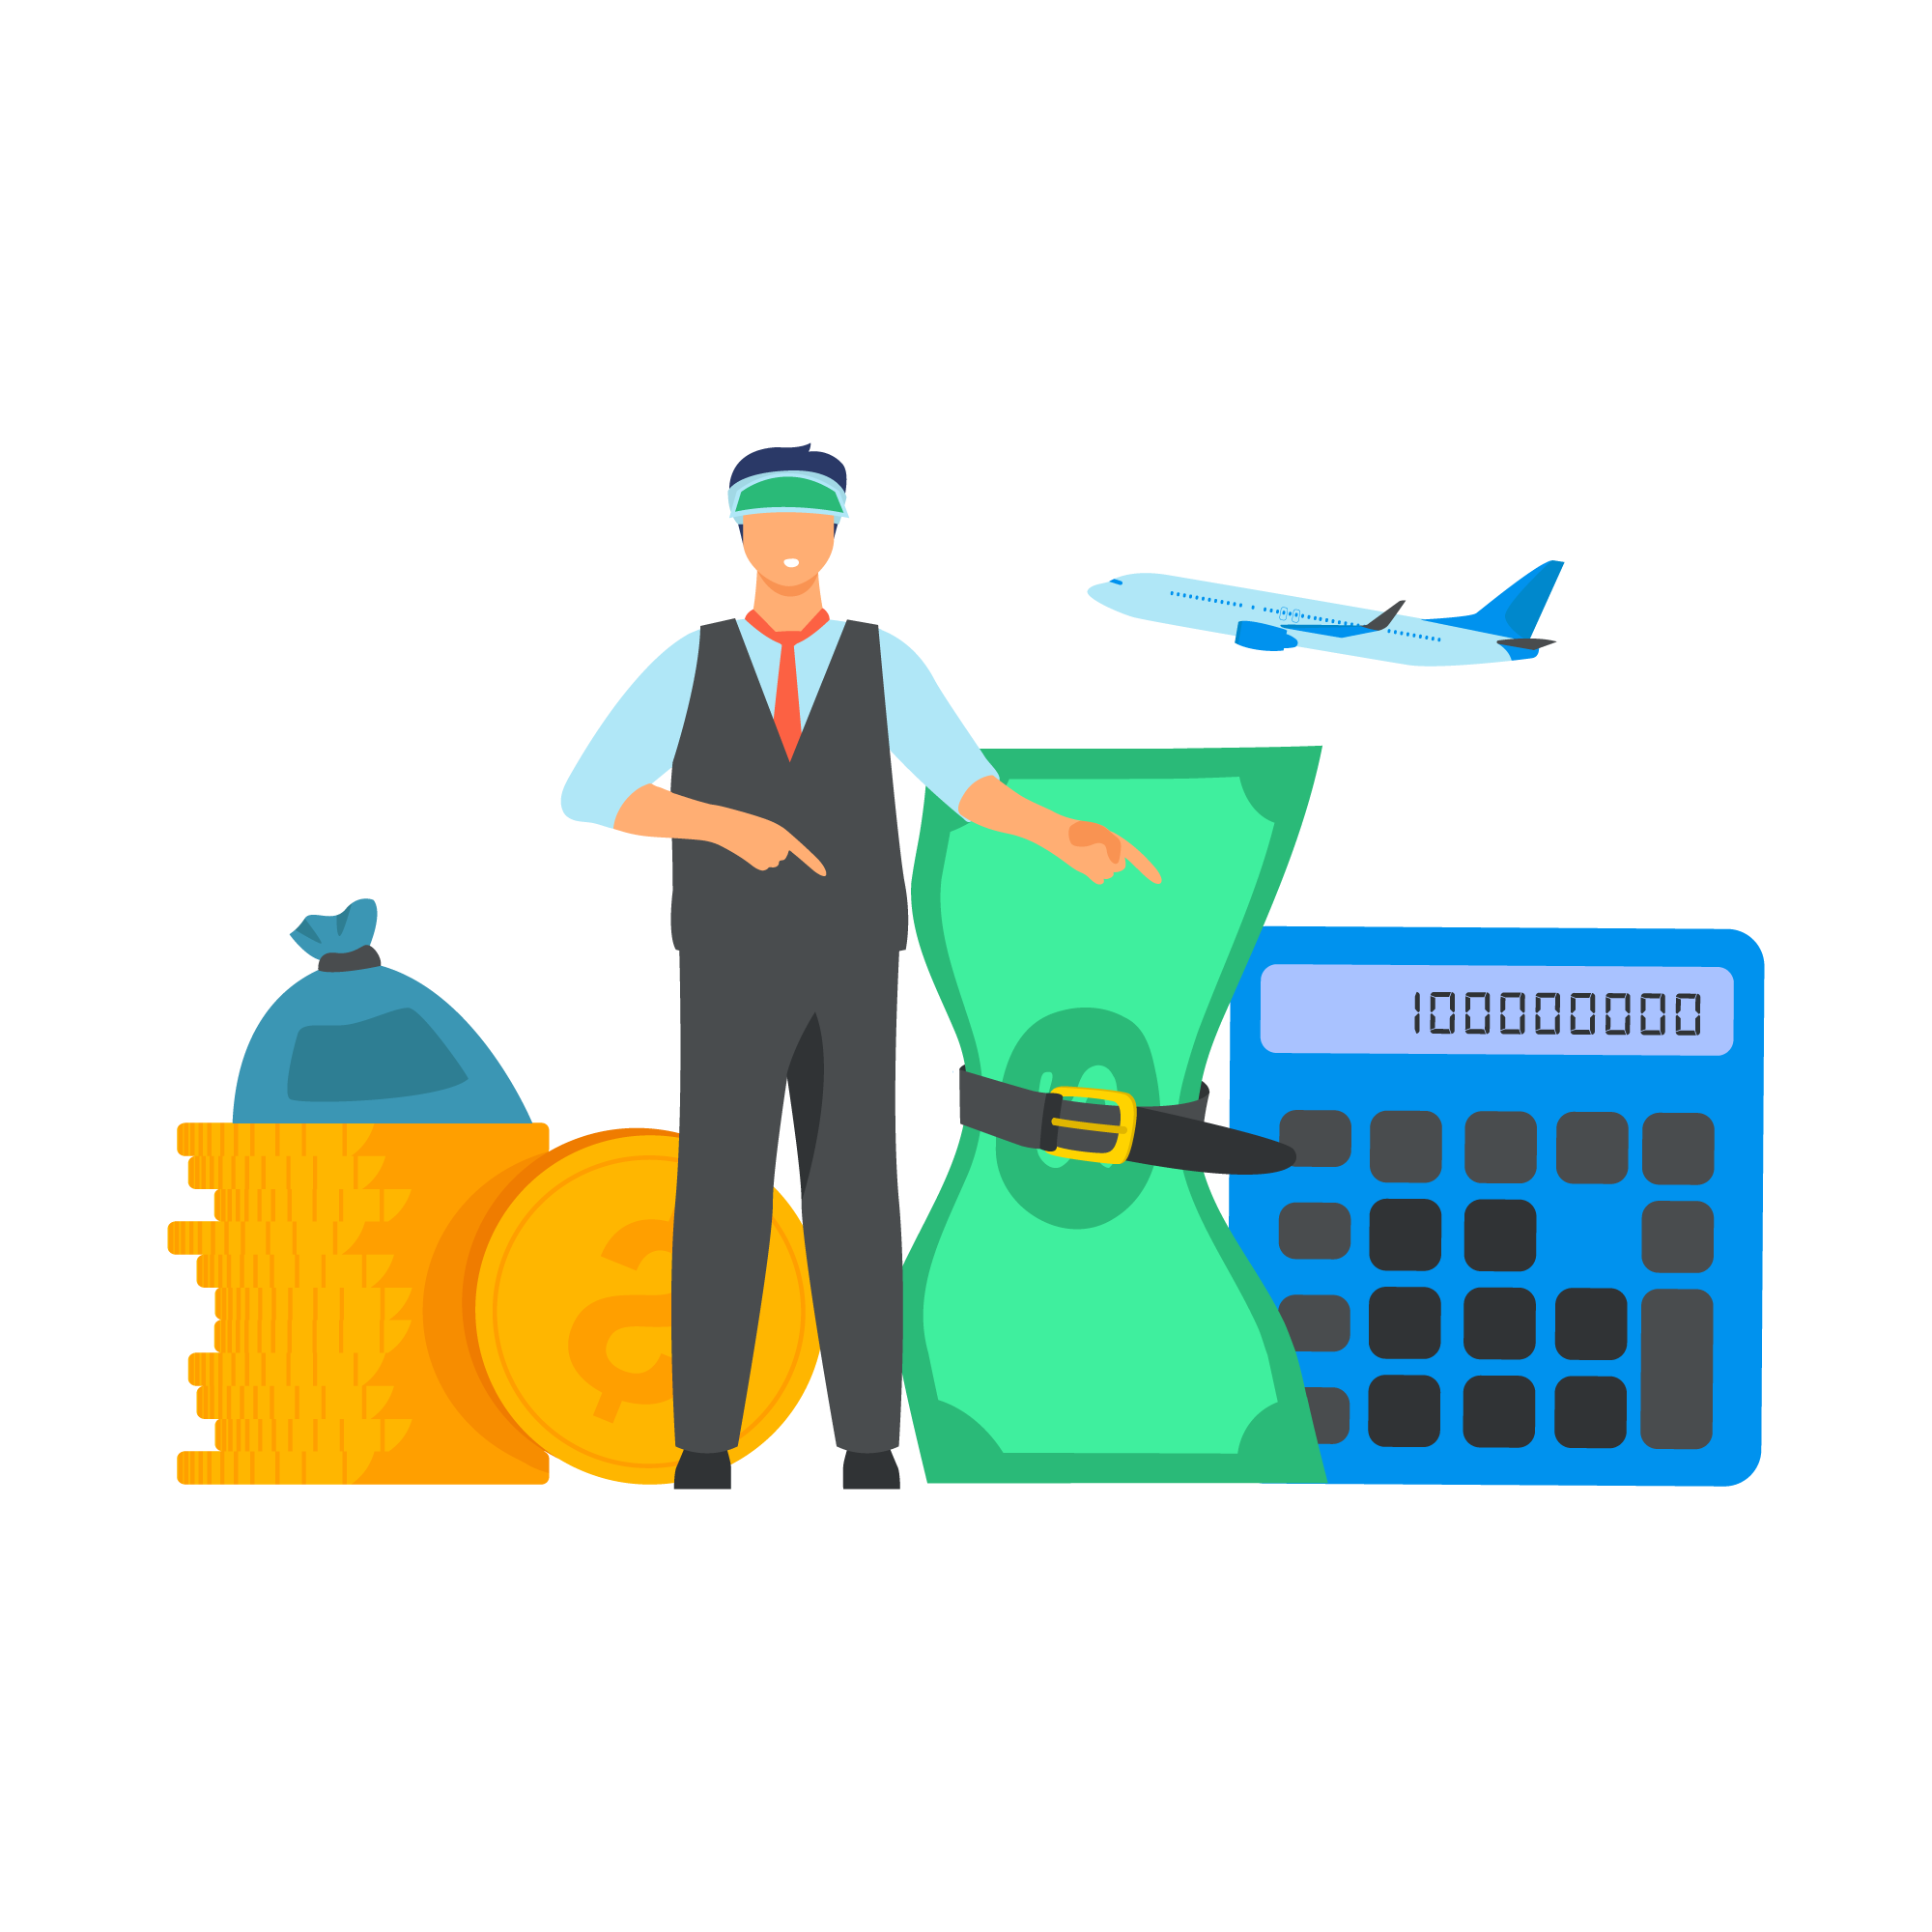 Squeezed Travel Budgets